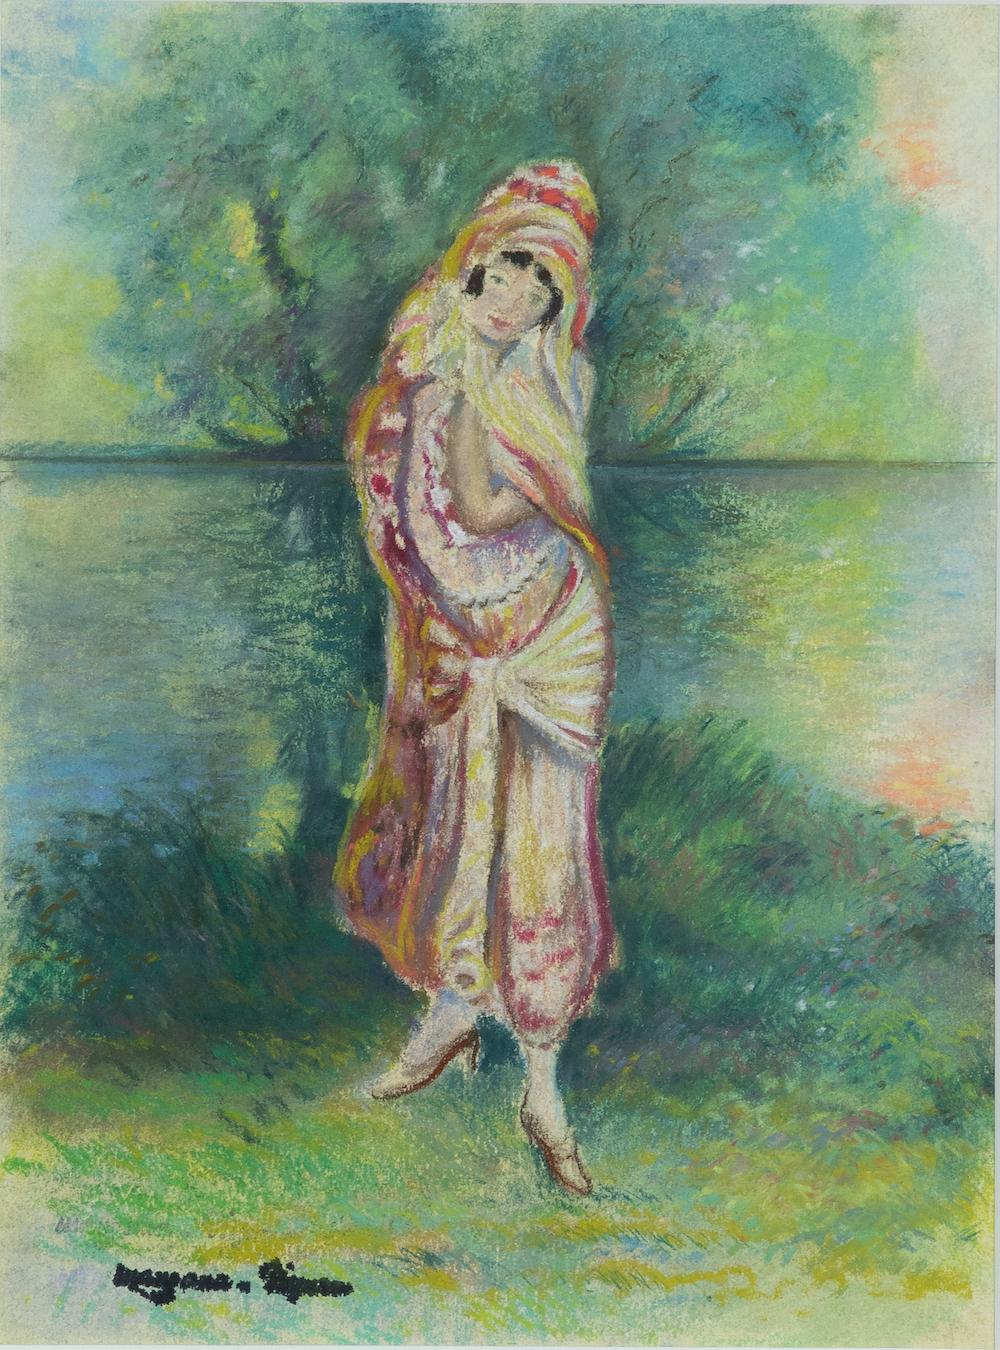 Femme en Costume Oriental by Georges Manzana Pissarro (1871-1961)
Pastel on paper
31.5 x 23.6 cm (12 ⅜ x 9 ¼ inches)
Signed with Estate stamp lower left
Executed circa 1925

This work is accompanied by a certificate of authenticity from Lélia